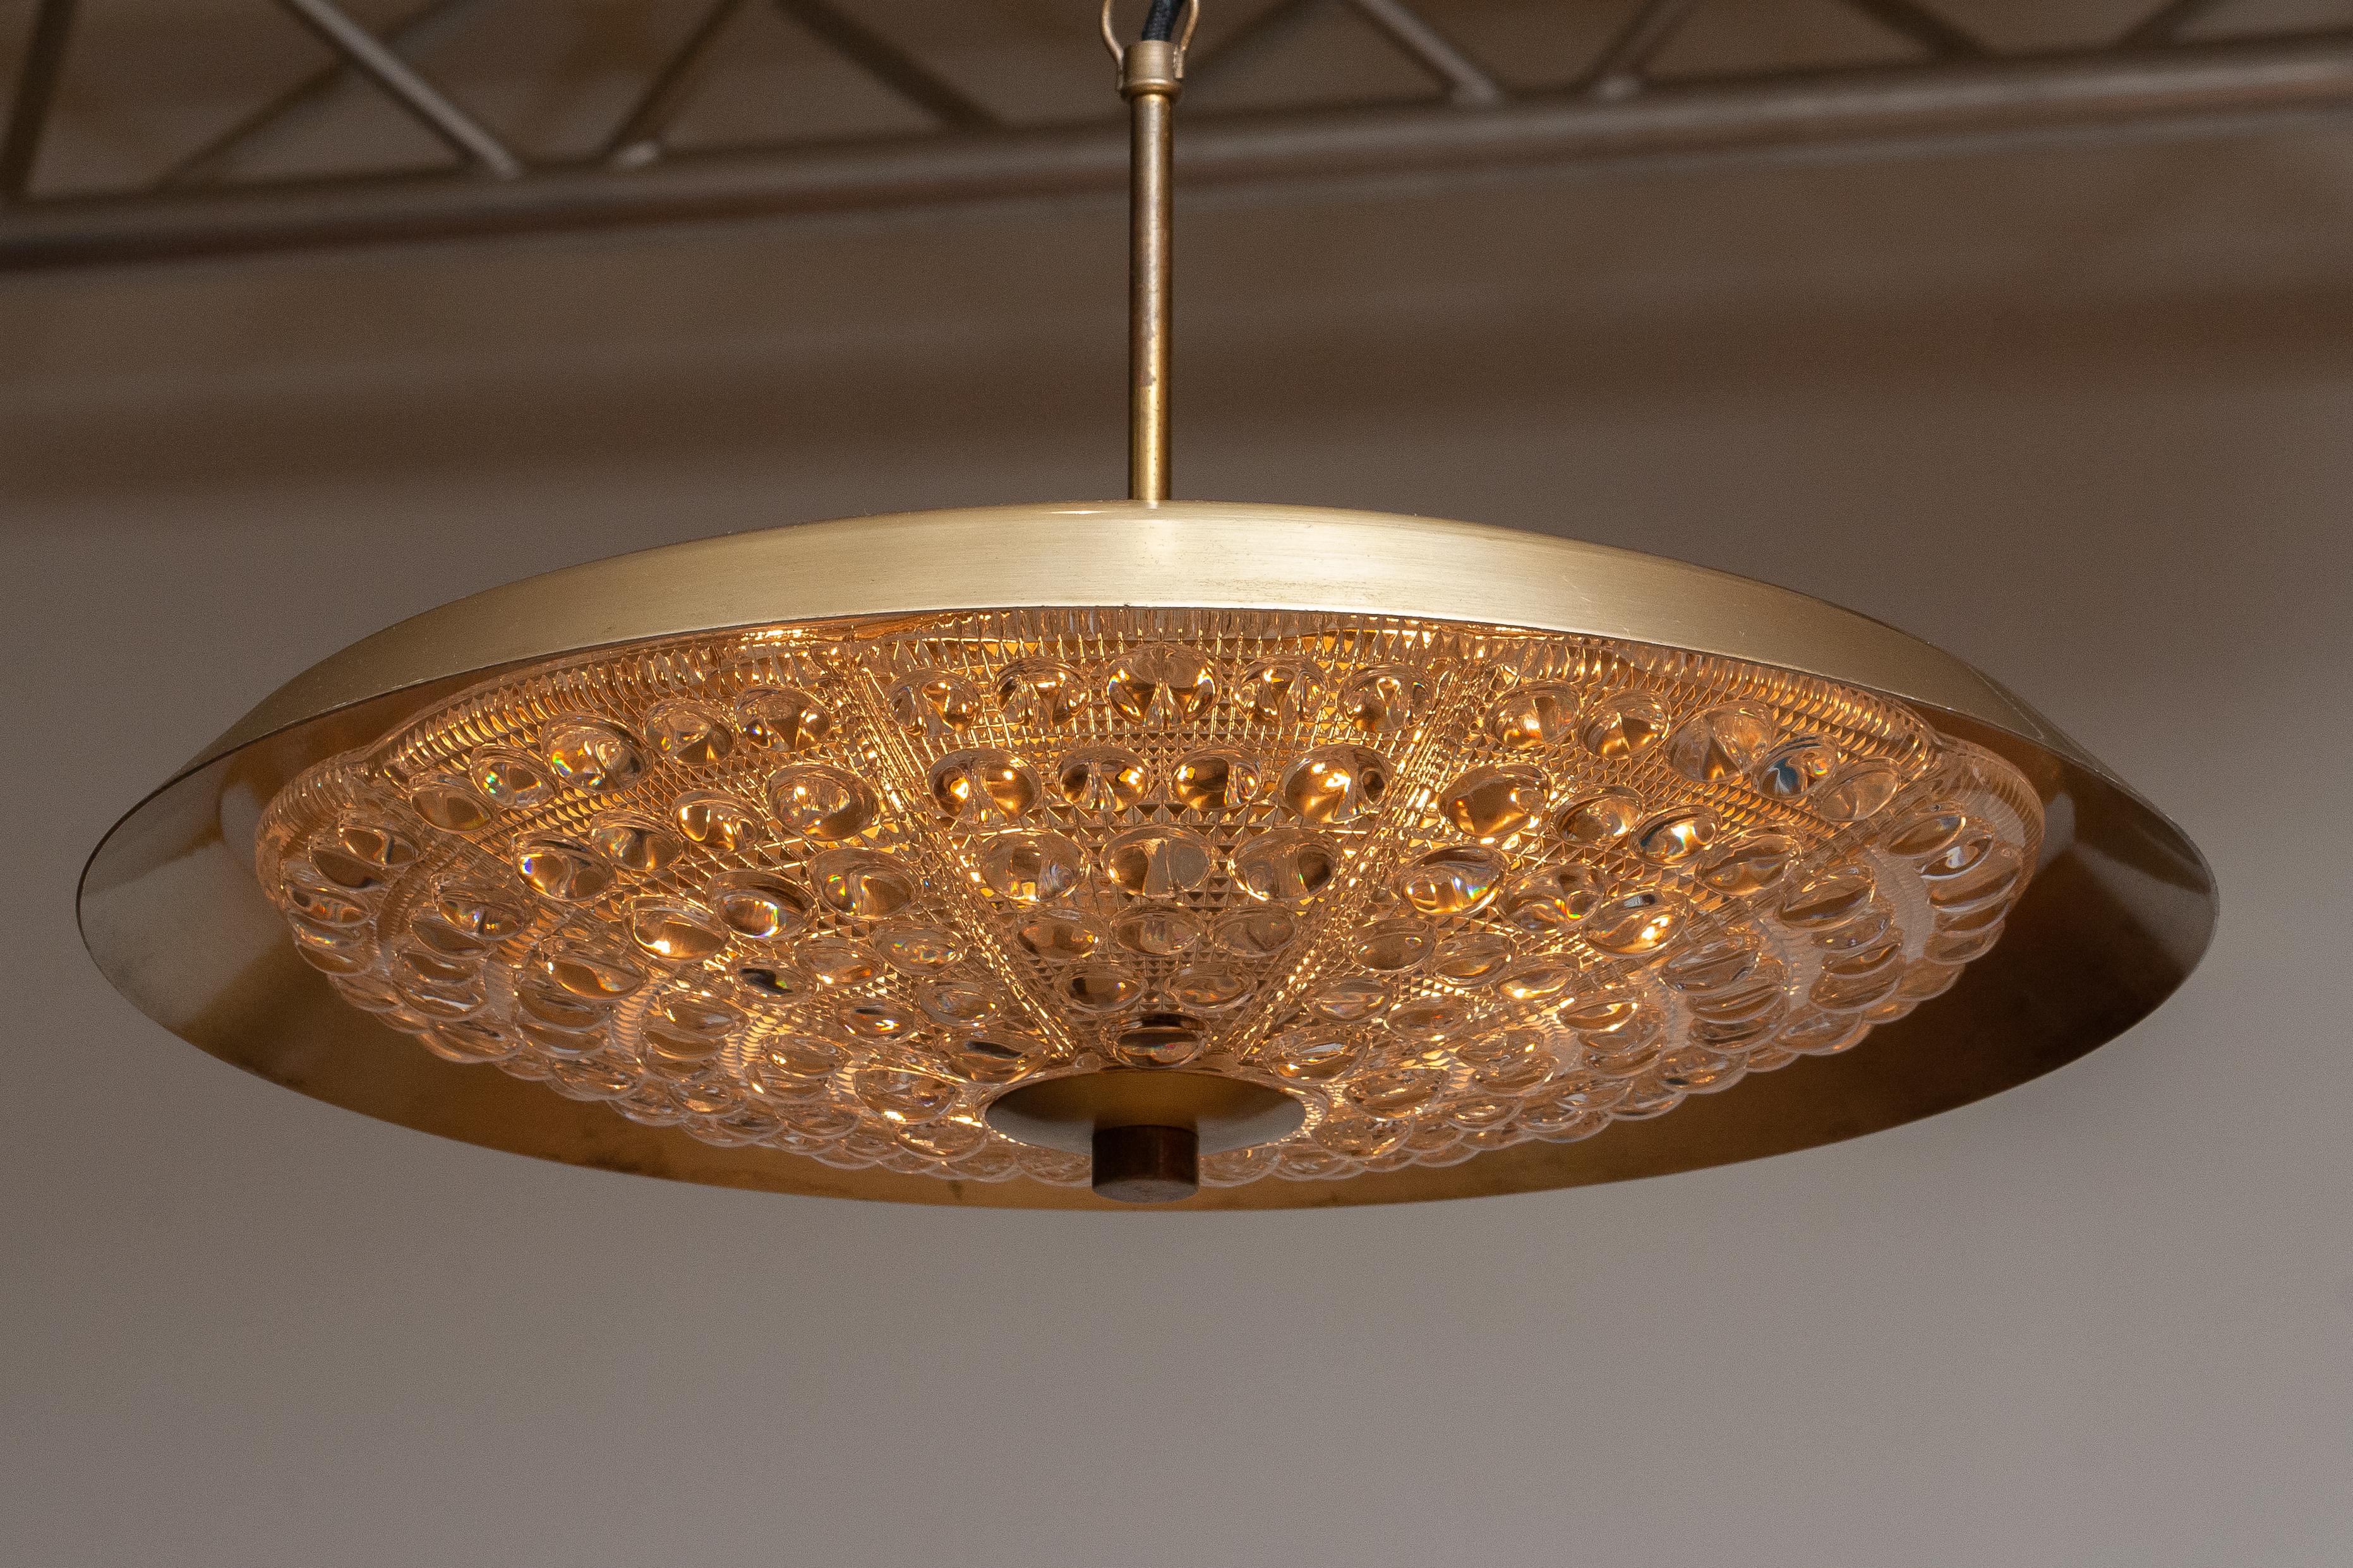 Mid-Century Modern 1950s, Brass and Glass Pendant Lamp Designed by Carl Fagerlund for Orrefors